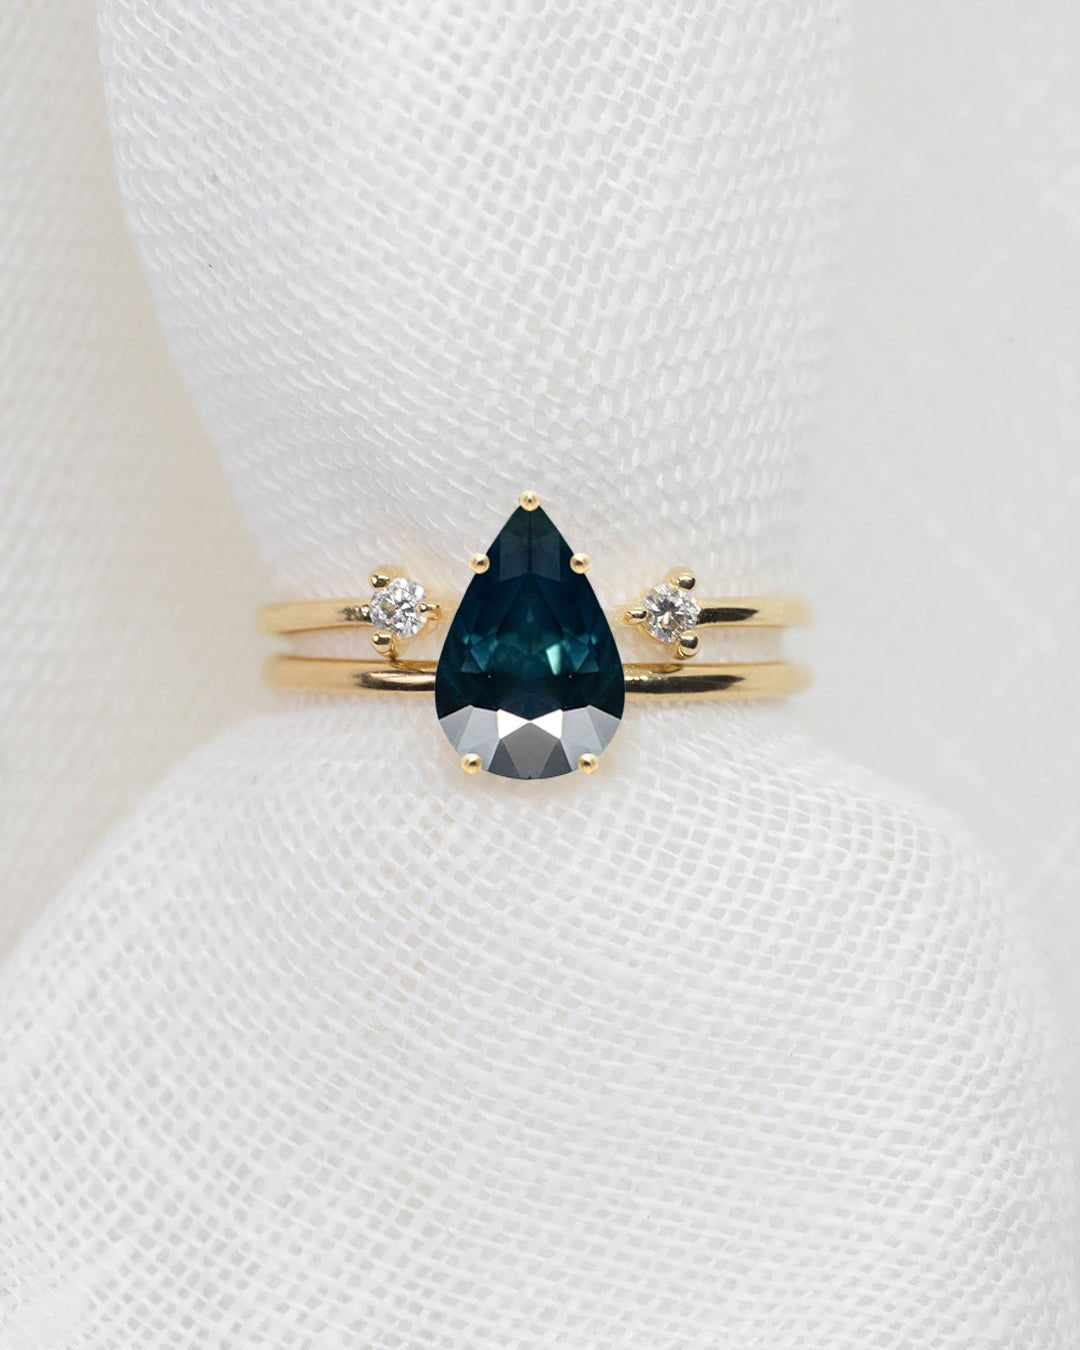 Pear 2.55ct Teal-Blue Brilliant Sapphire - Lelya - bespoke engagement and wedding rings made in Scotland, UK